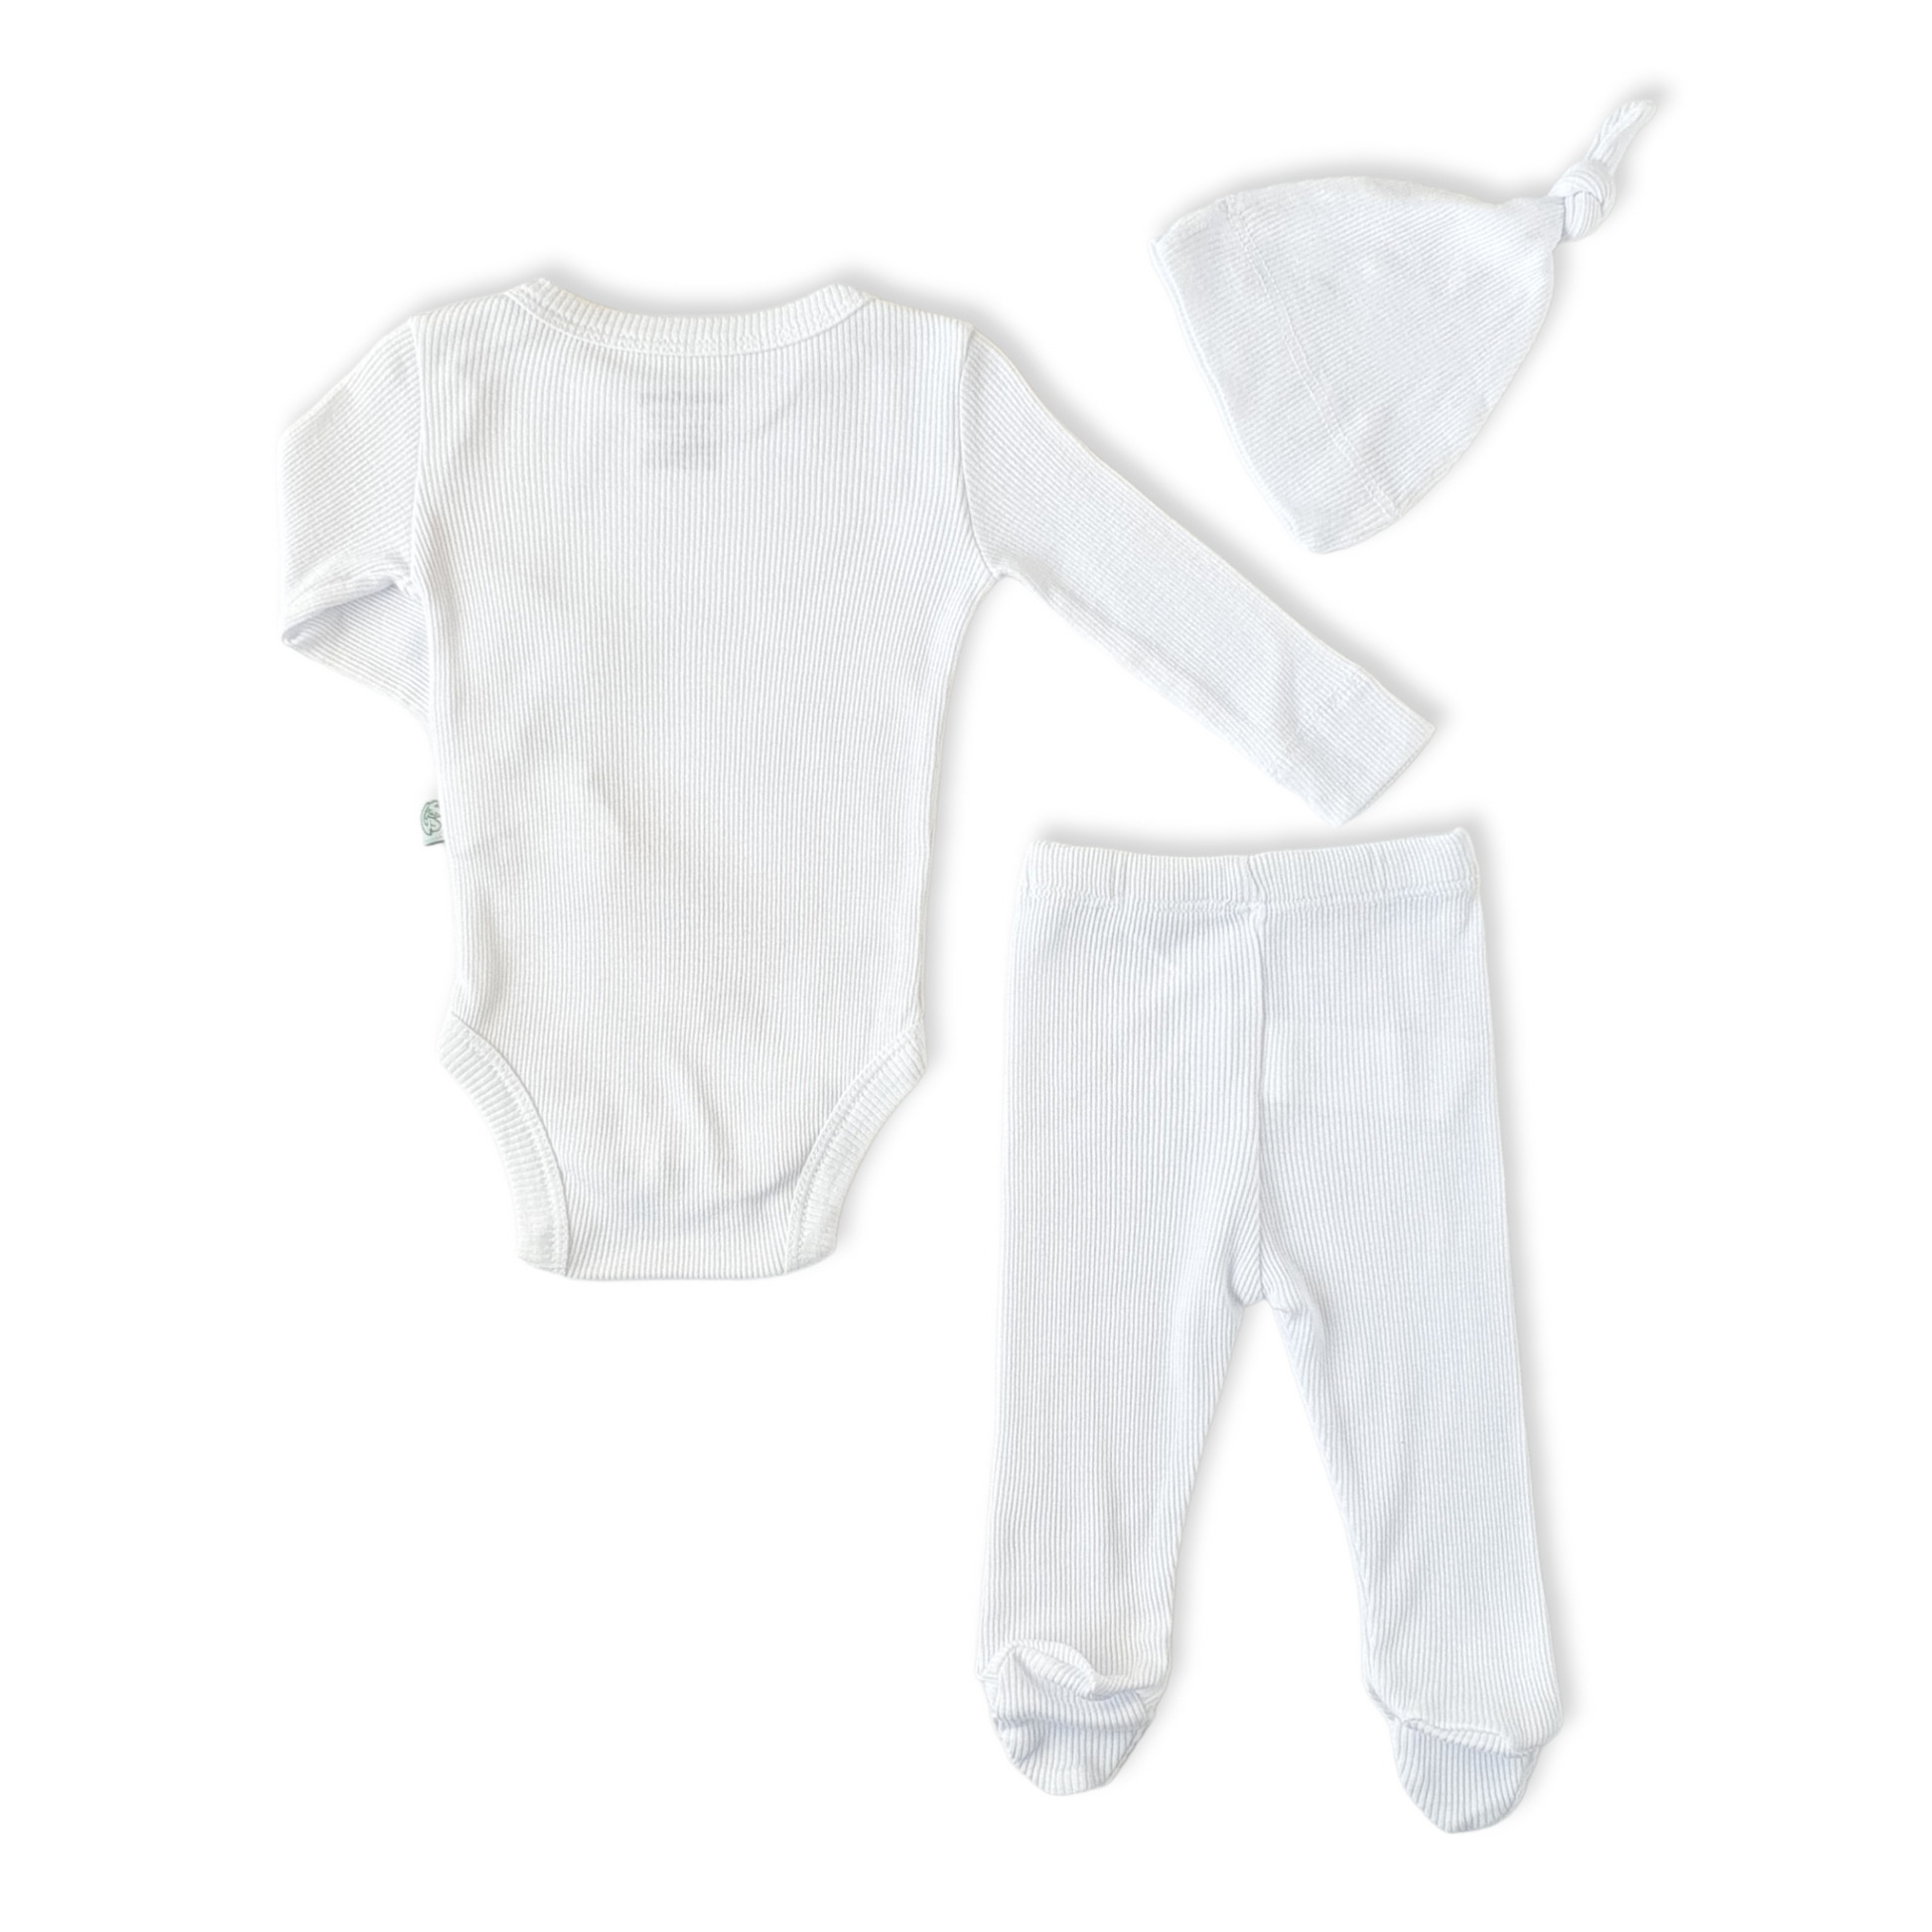 Organic Cotton Footed White Unisex Basic Body With Pants and Cap-Basic, Body, Bodysuit, Boy, Cap, catboy, catgirl, catset3pcs, catunisex, Creeper, Footed, Girl, Hat, Long Sleeve, Onesie, Organic, Unisex, White-BabyCosy-[Too Twee]-[Tootwee]-[baby]-[newborn]-[clothes]-[essentials]-[toys]-[Lebanon]